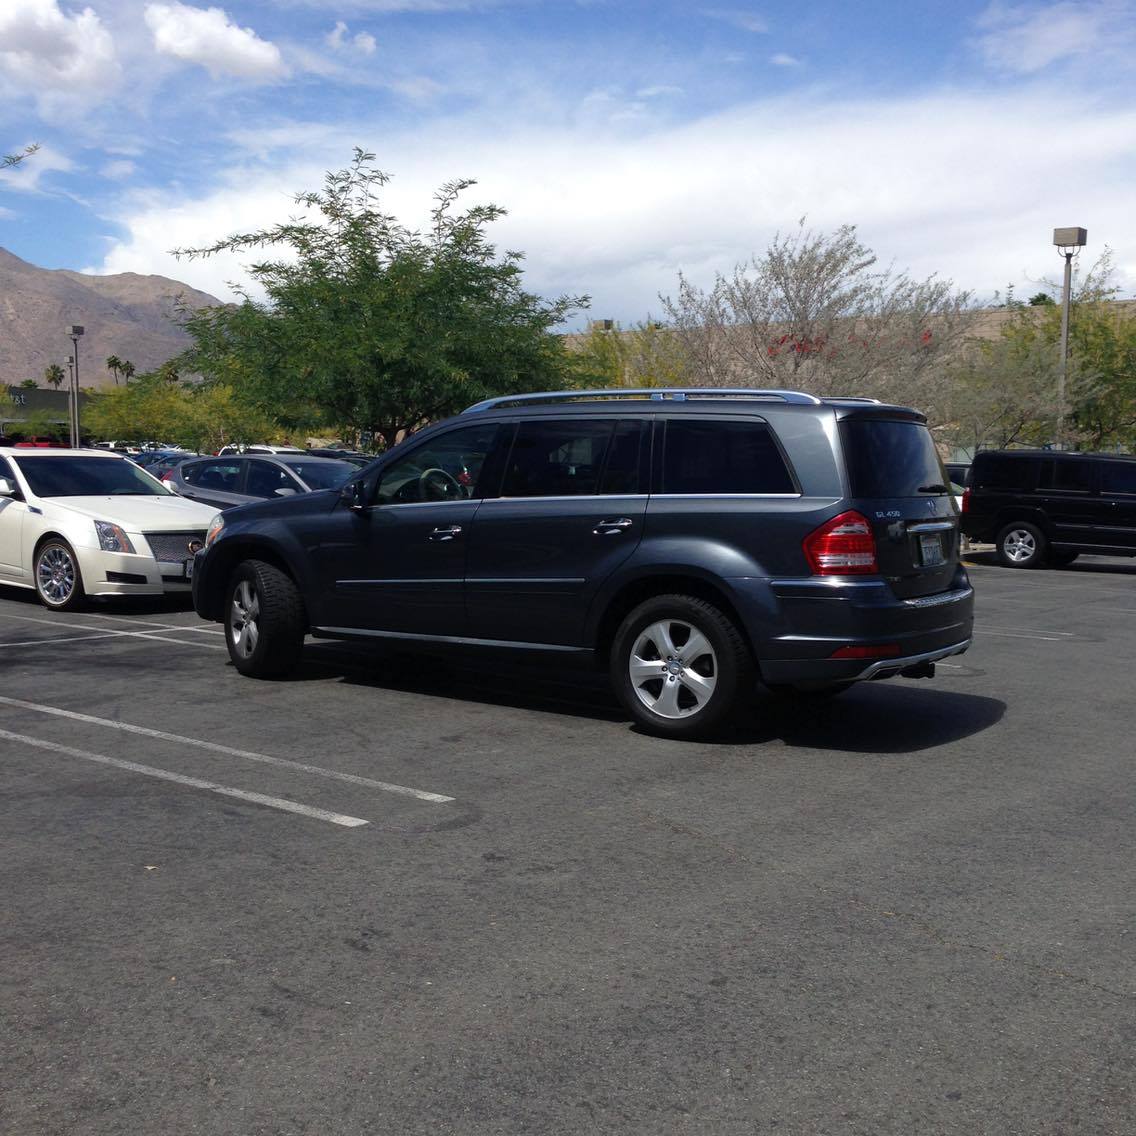 terrible parking palm springs